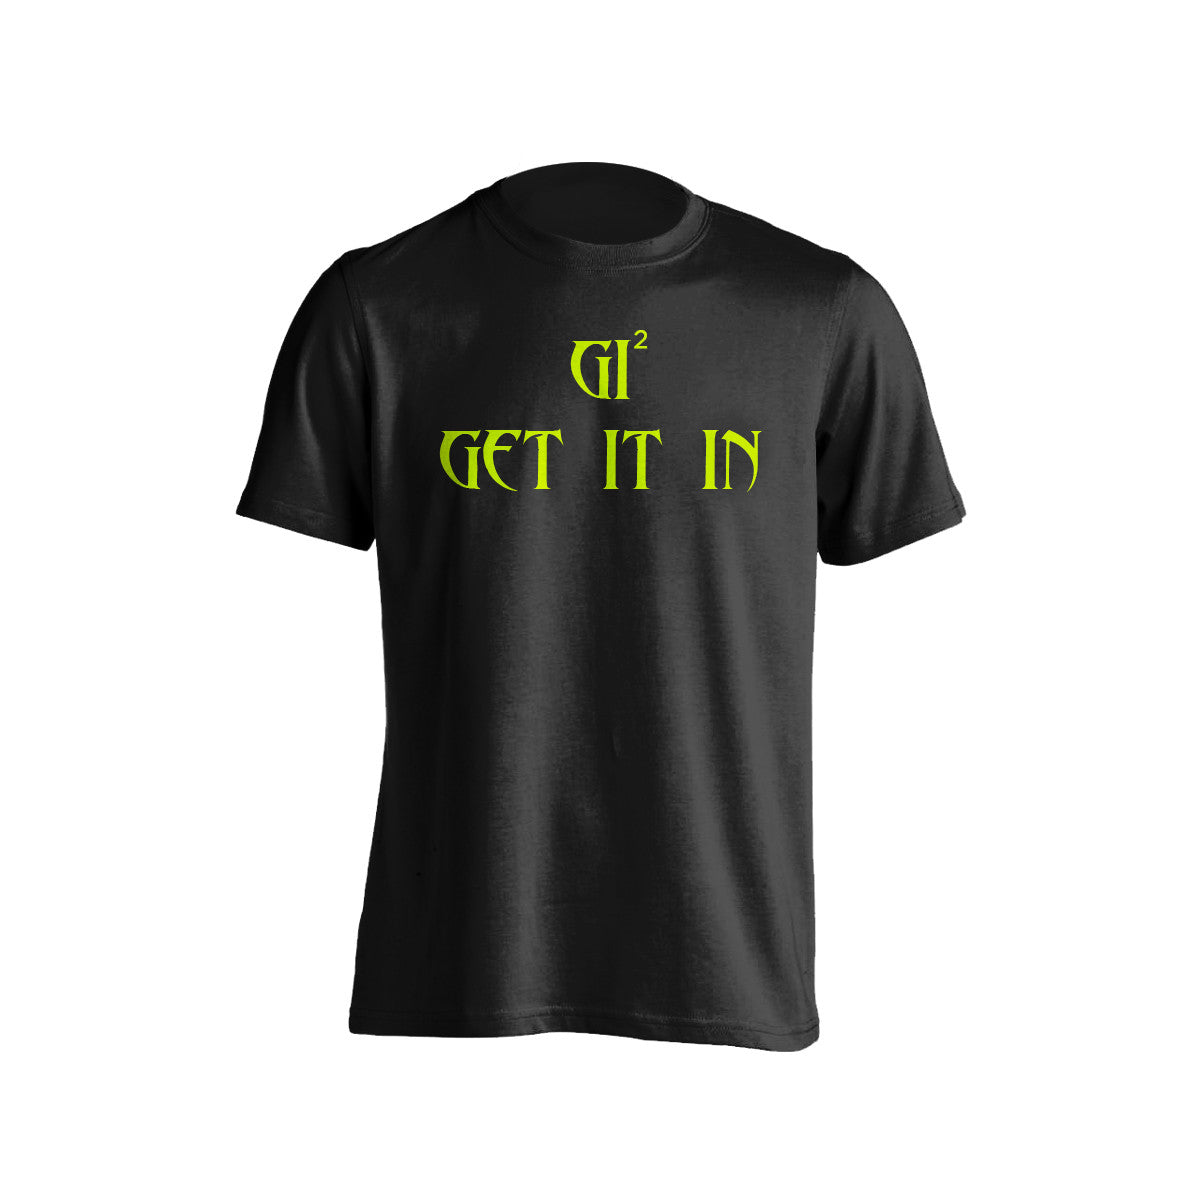 Men's "Competitor" GET IT IN T-Shirt - GET IT IN Apparel